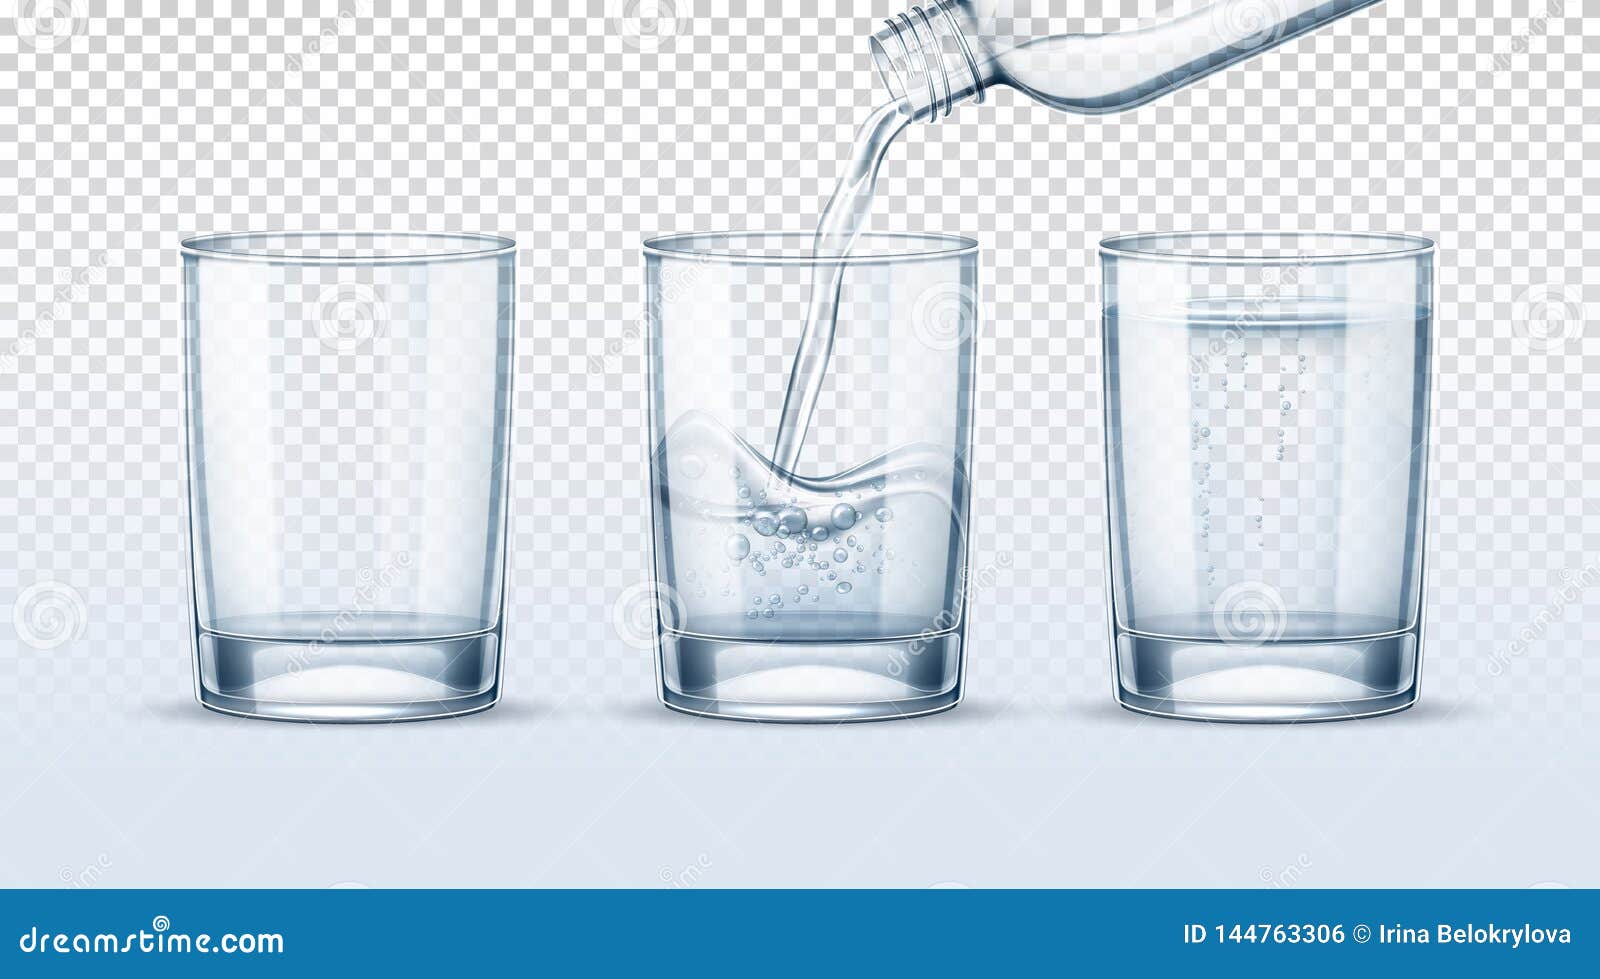 https://thumbs.dreamstime.com/z/vector-pure-water-pouring-realistic-glass-cup-empty-full-one-plastic-bottle-transparent-background-set-purified-144763306.jpg